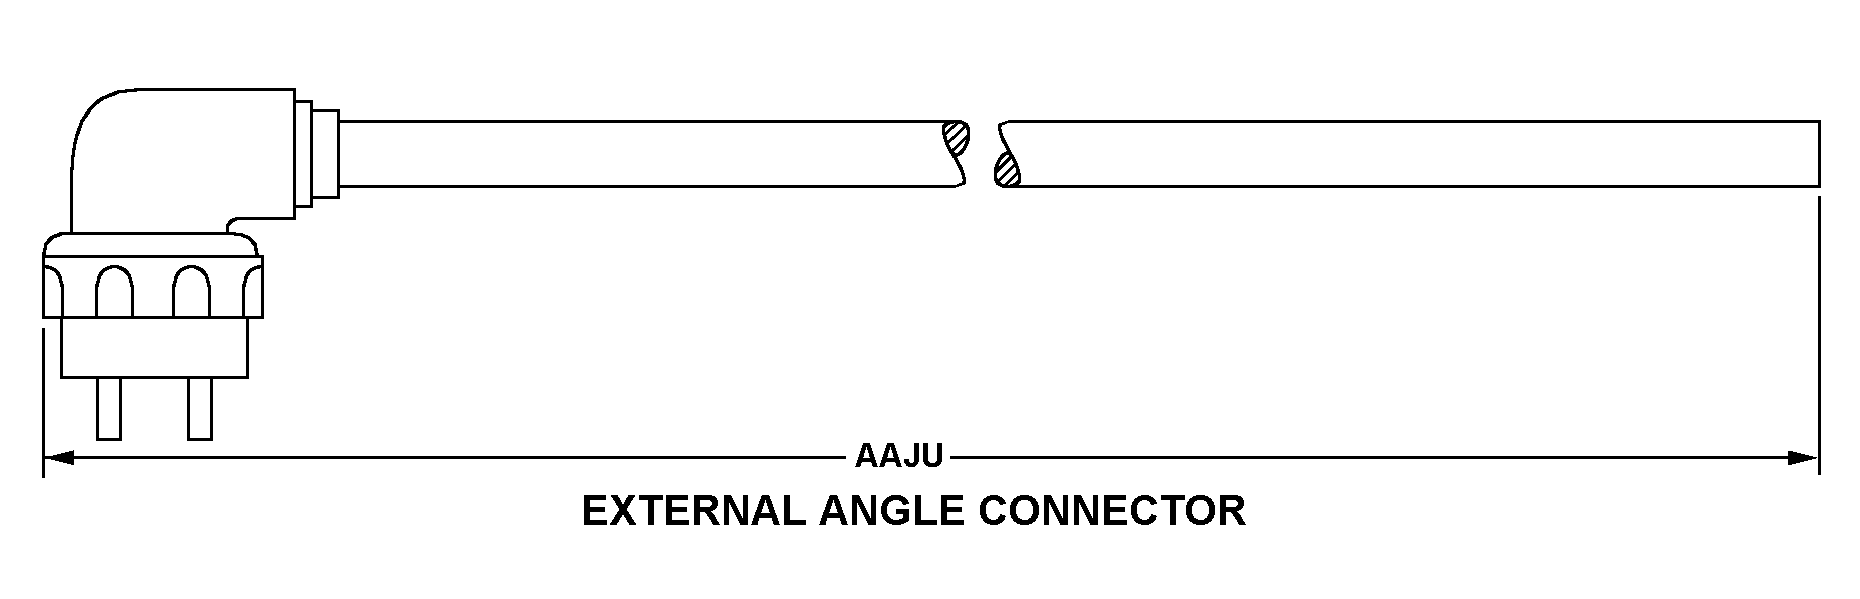 EXTERNAL ANGLE CONNECTOR style nsn 5995-01-375-8035